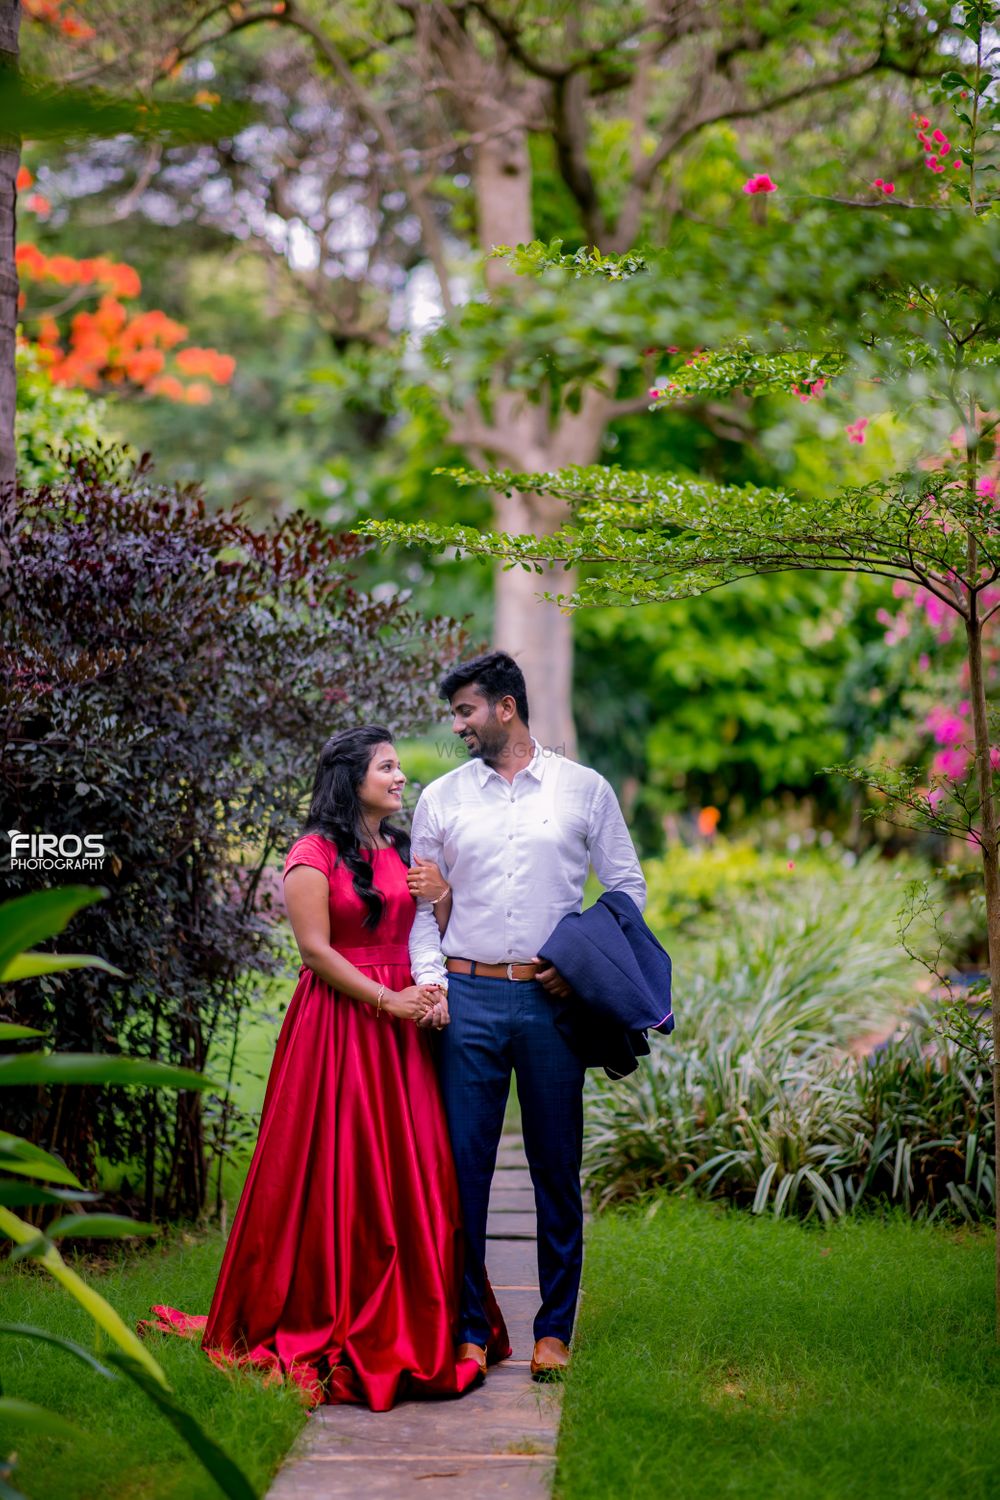 Photo From Ruchitha & Kishor - By FirosPhotography